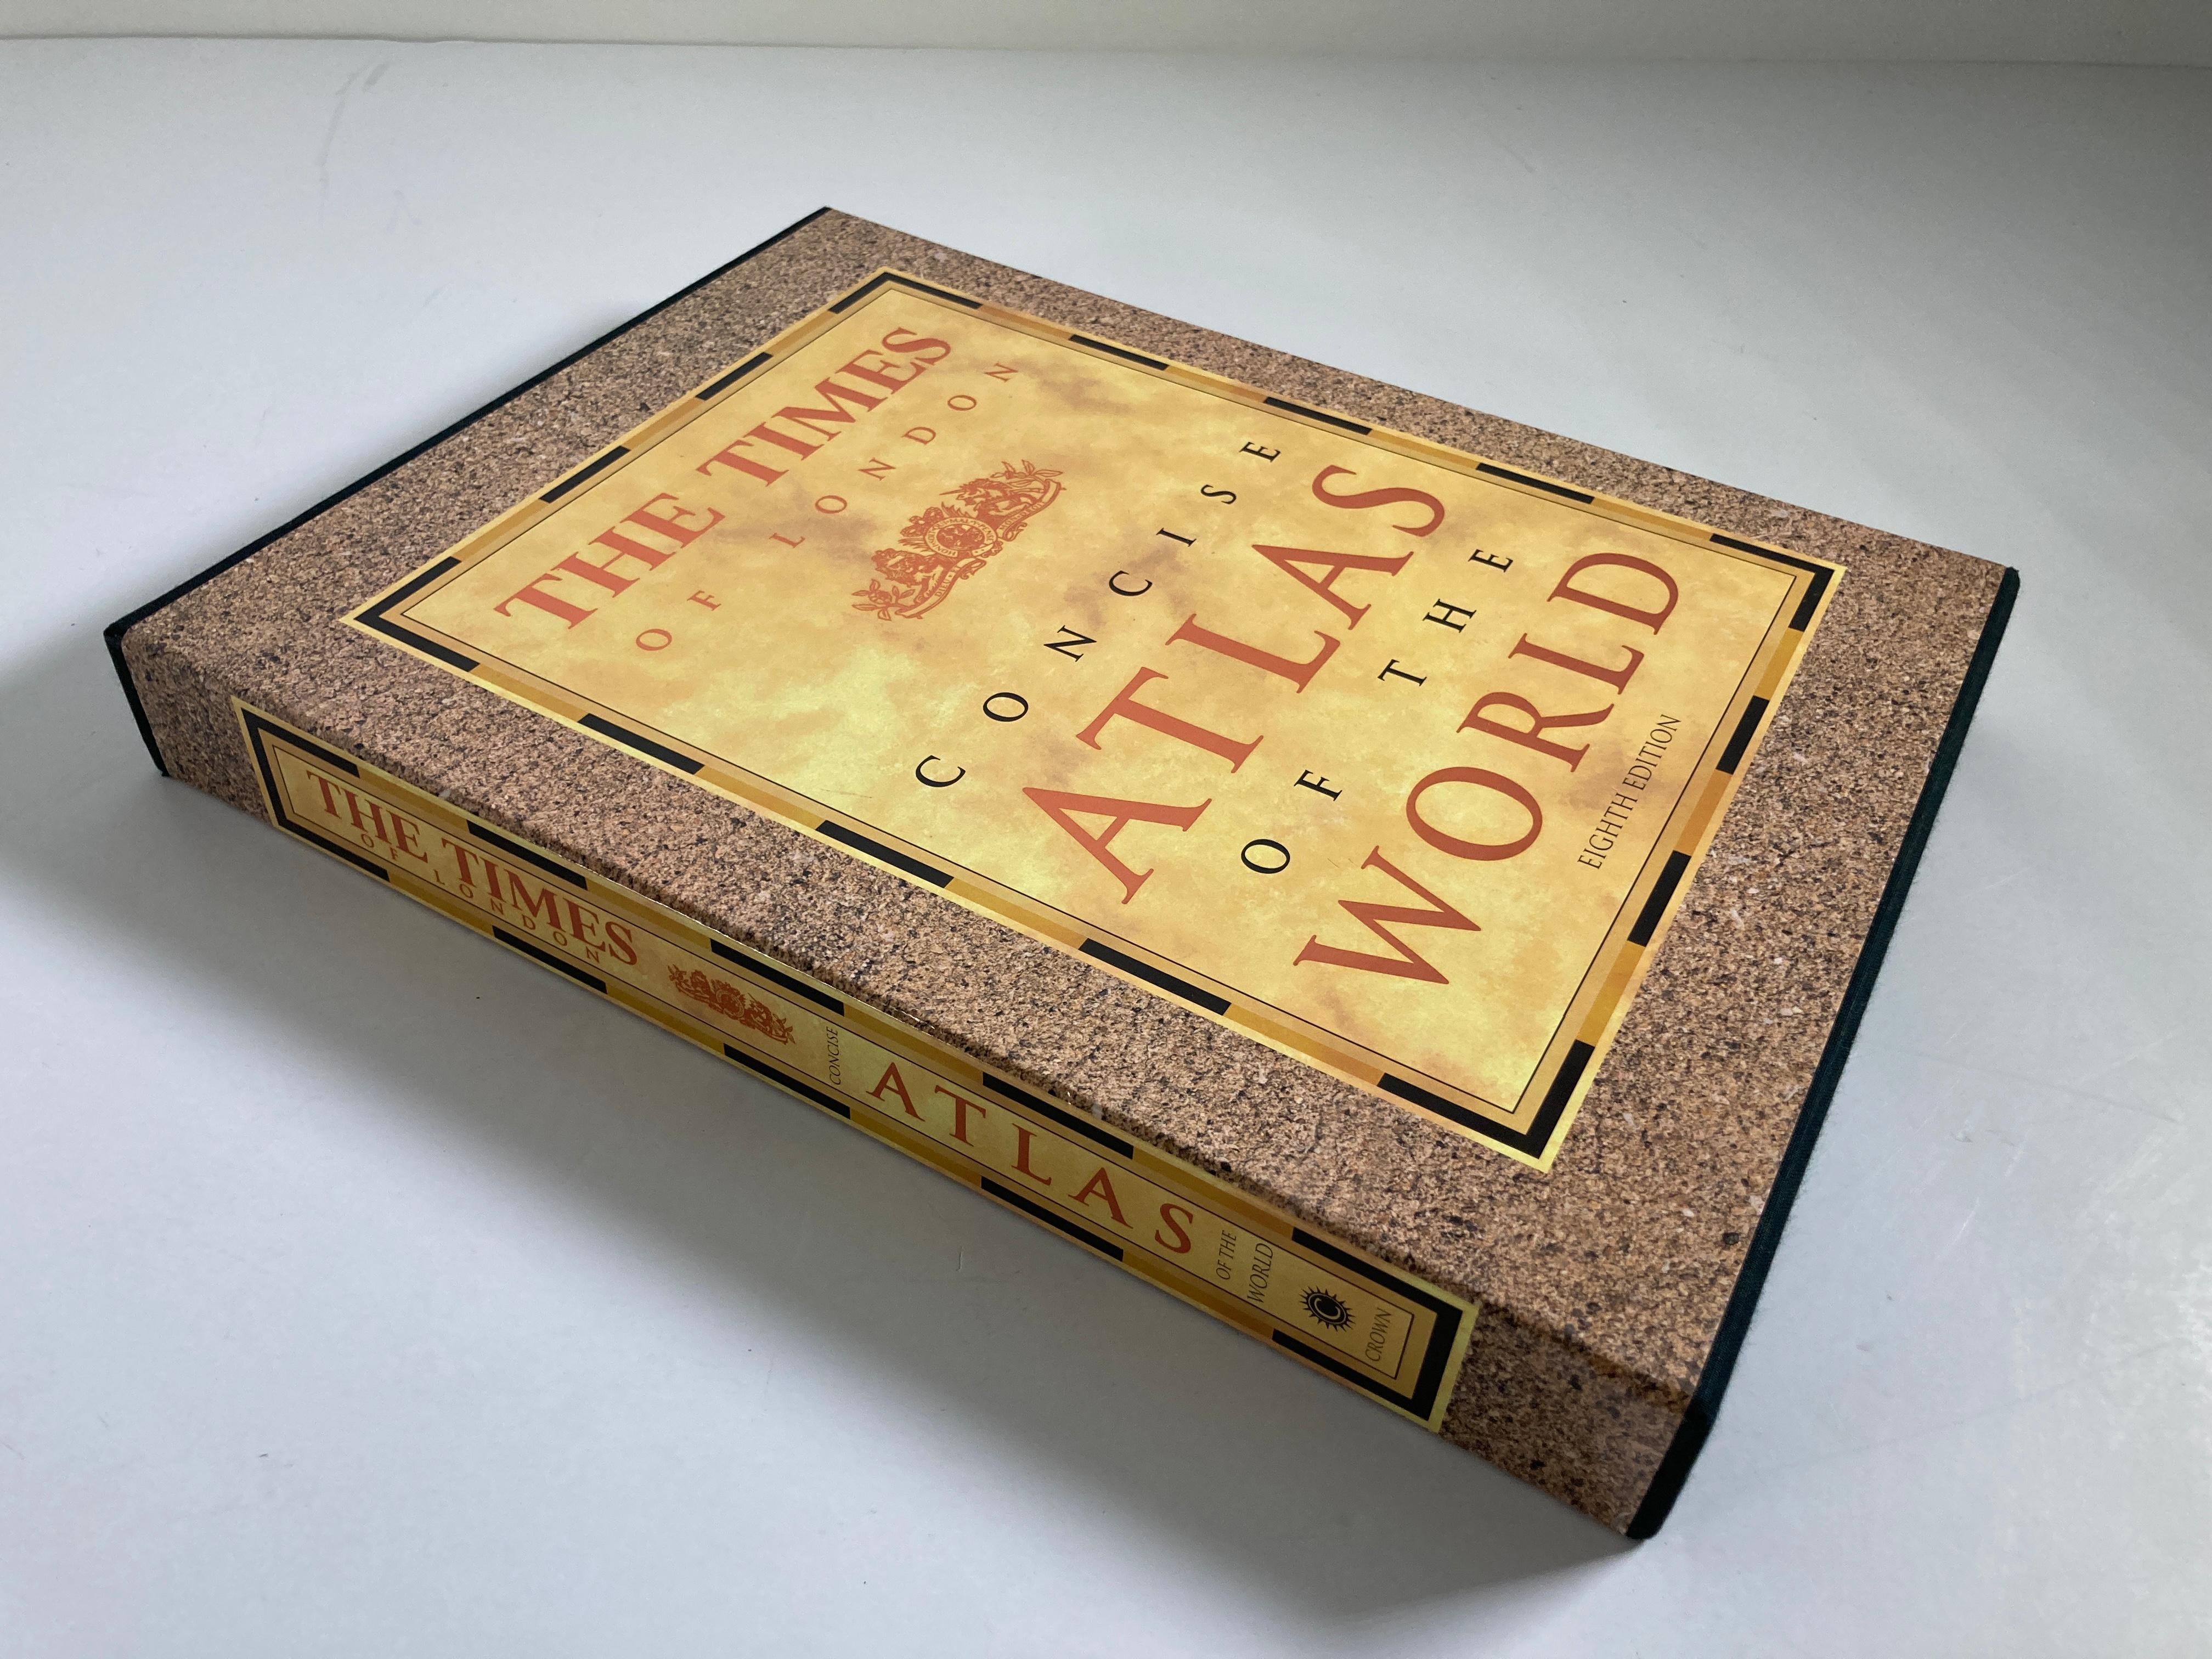 The Times of London Concise Atlas of the World.
Large oversized book in sleeve.
Eighth Edition 8th Edition
by London Times (Author)
The Times of London Atlas of the World has long been famous for its authority and for setting the standard in